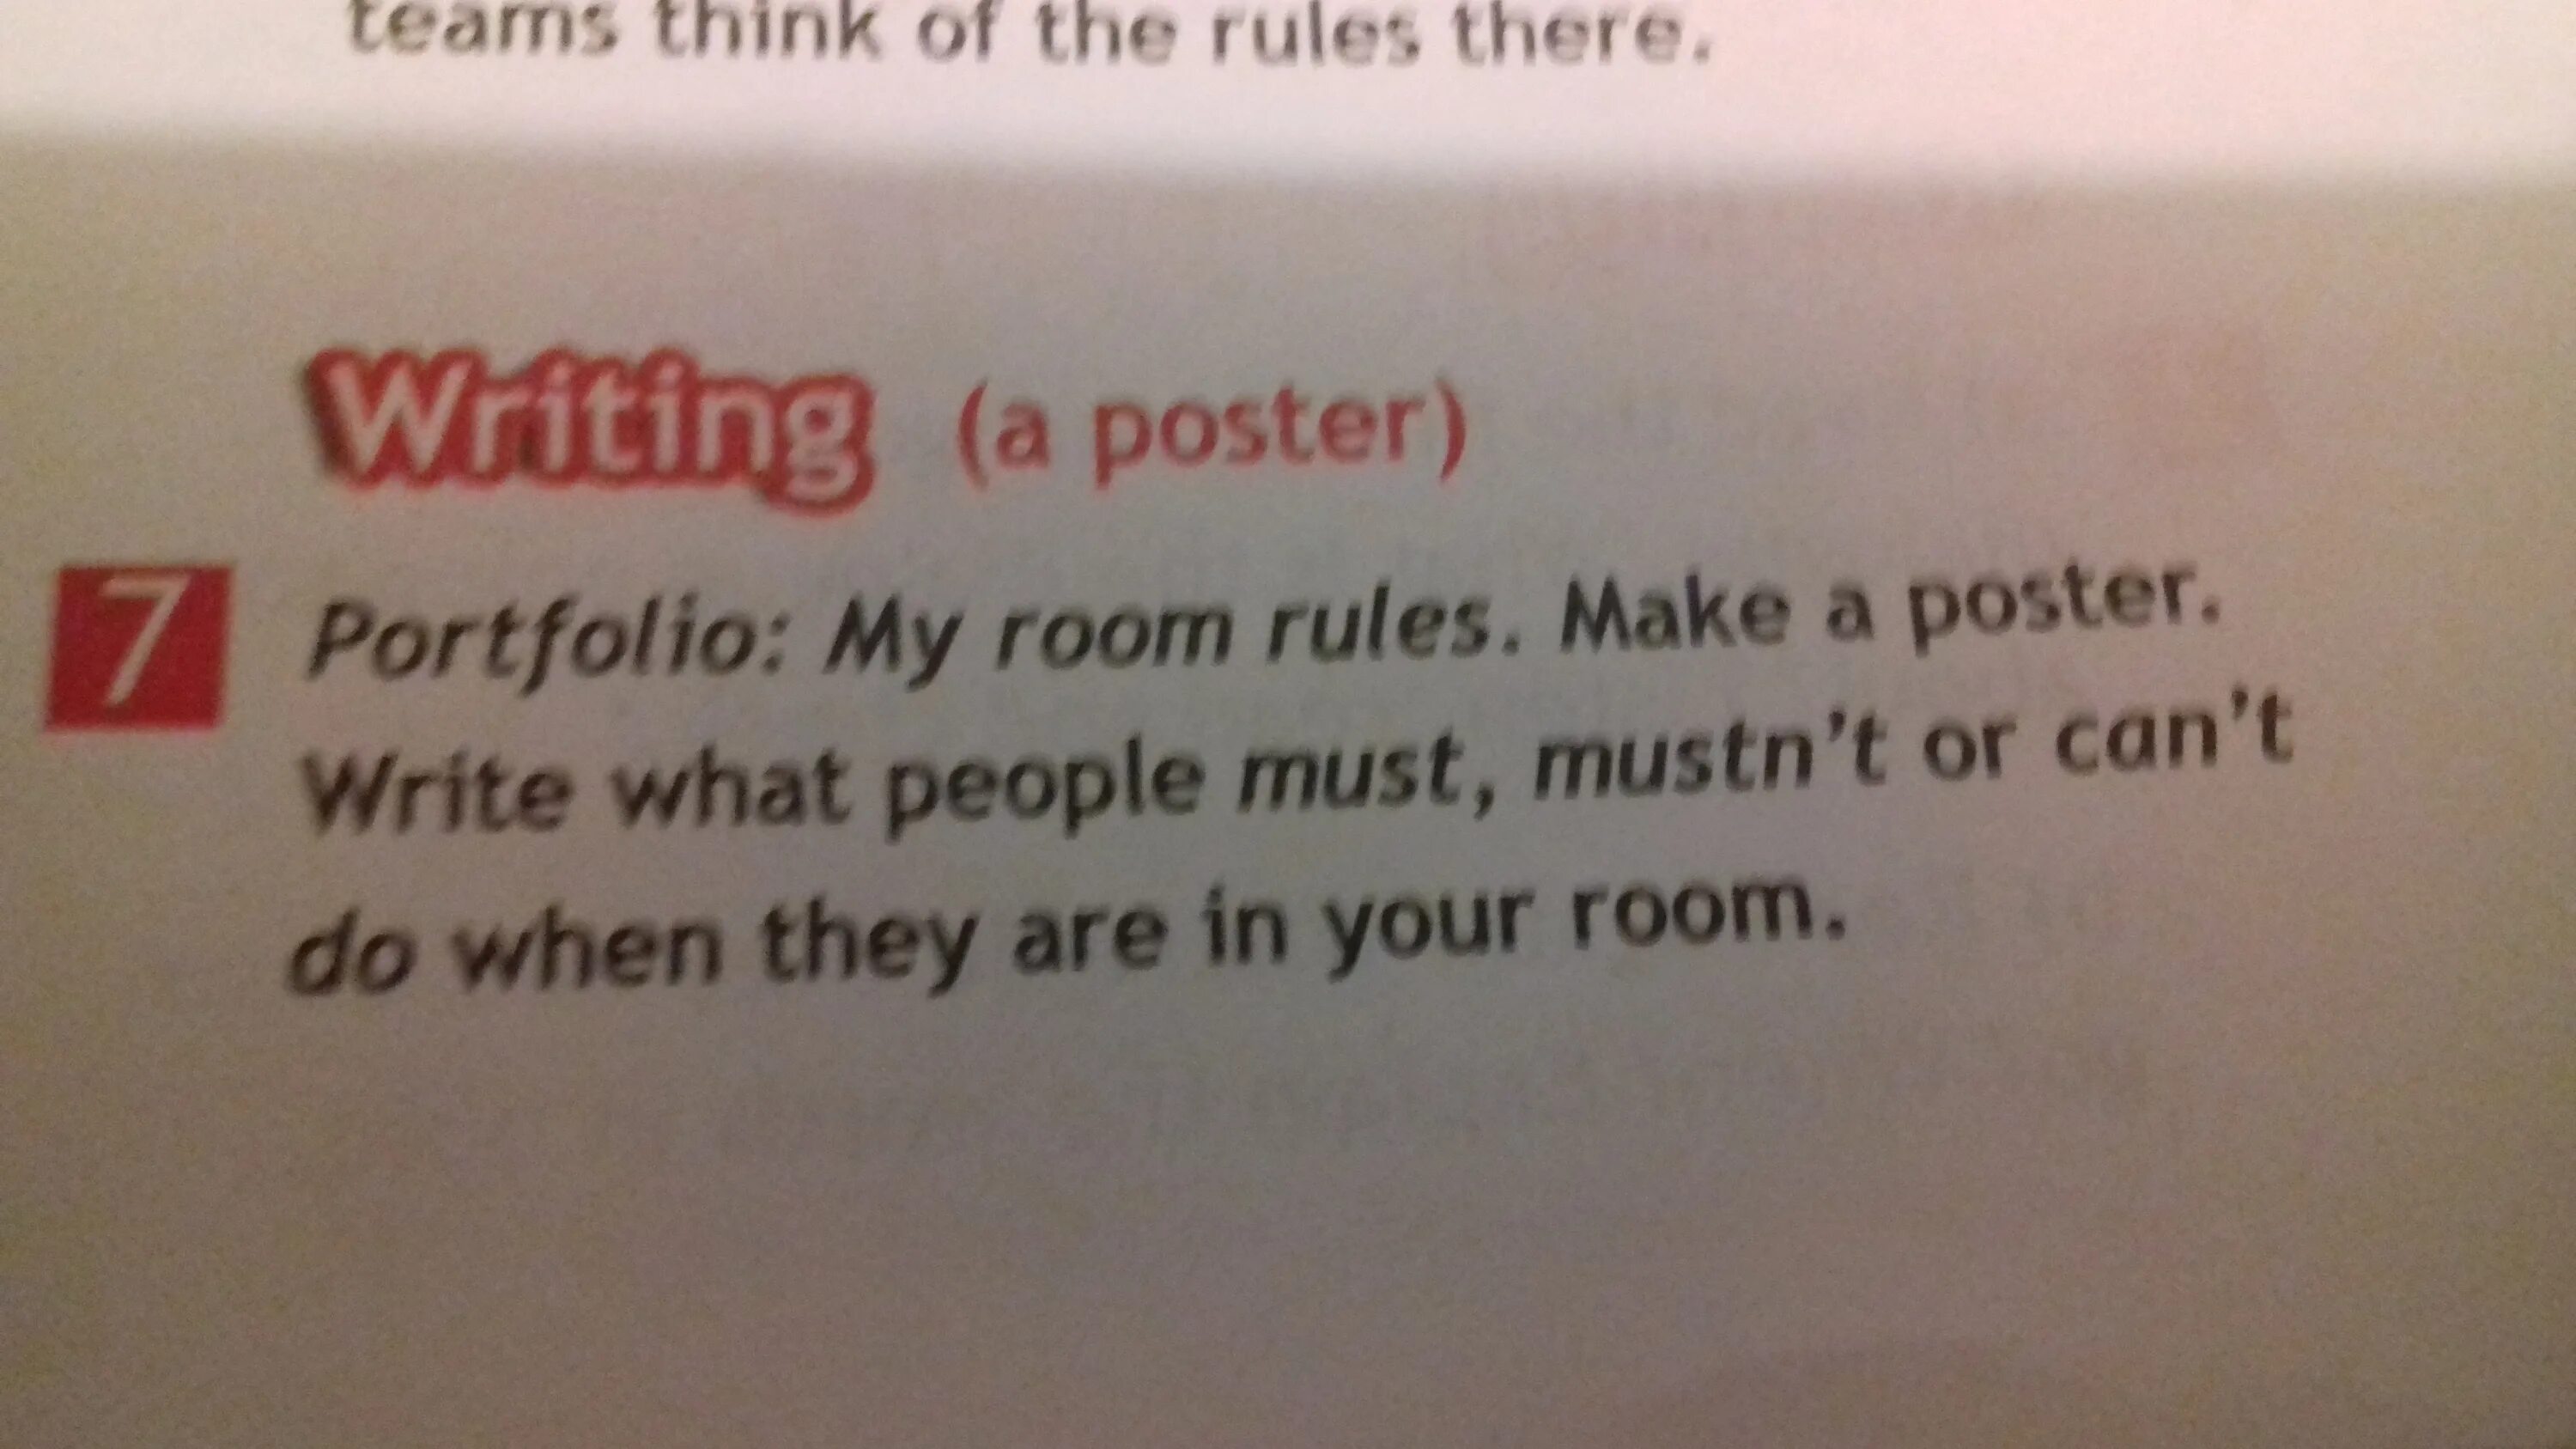 My room rules make a poster write. Плакат my Room Rules. Портфолио my Room Rules make a poster write what people must mustn't. Write the Rules for your Room. Портфолио my Room Rules make a poster write.